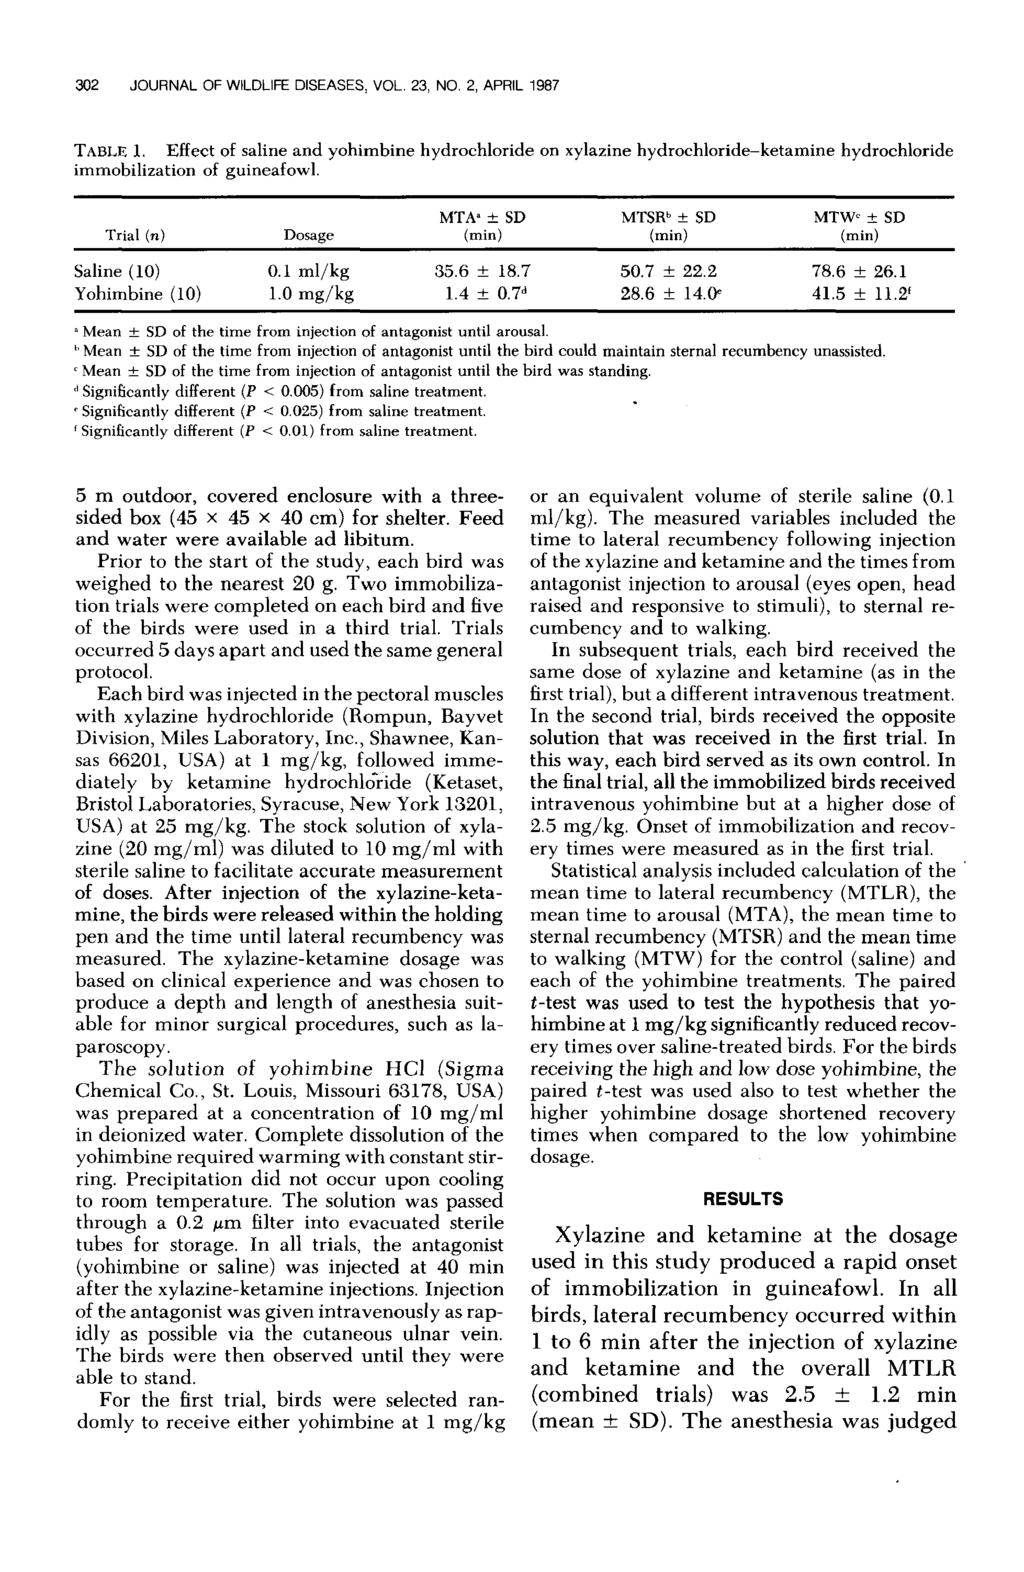 302 JOURNAL OF WILDLIFE DISEASES, VOL. 23, NO. 2, APRIL 1987 TABLE 1. Effect of saline and yohimbine hydrochloride on xylazine hydrochloride-ketamine hydrochloride immobilization of guineafowl.